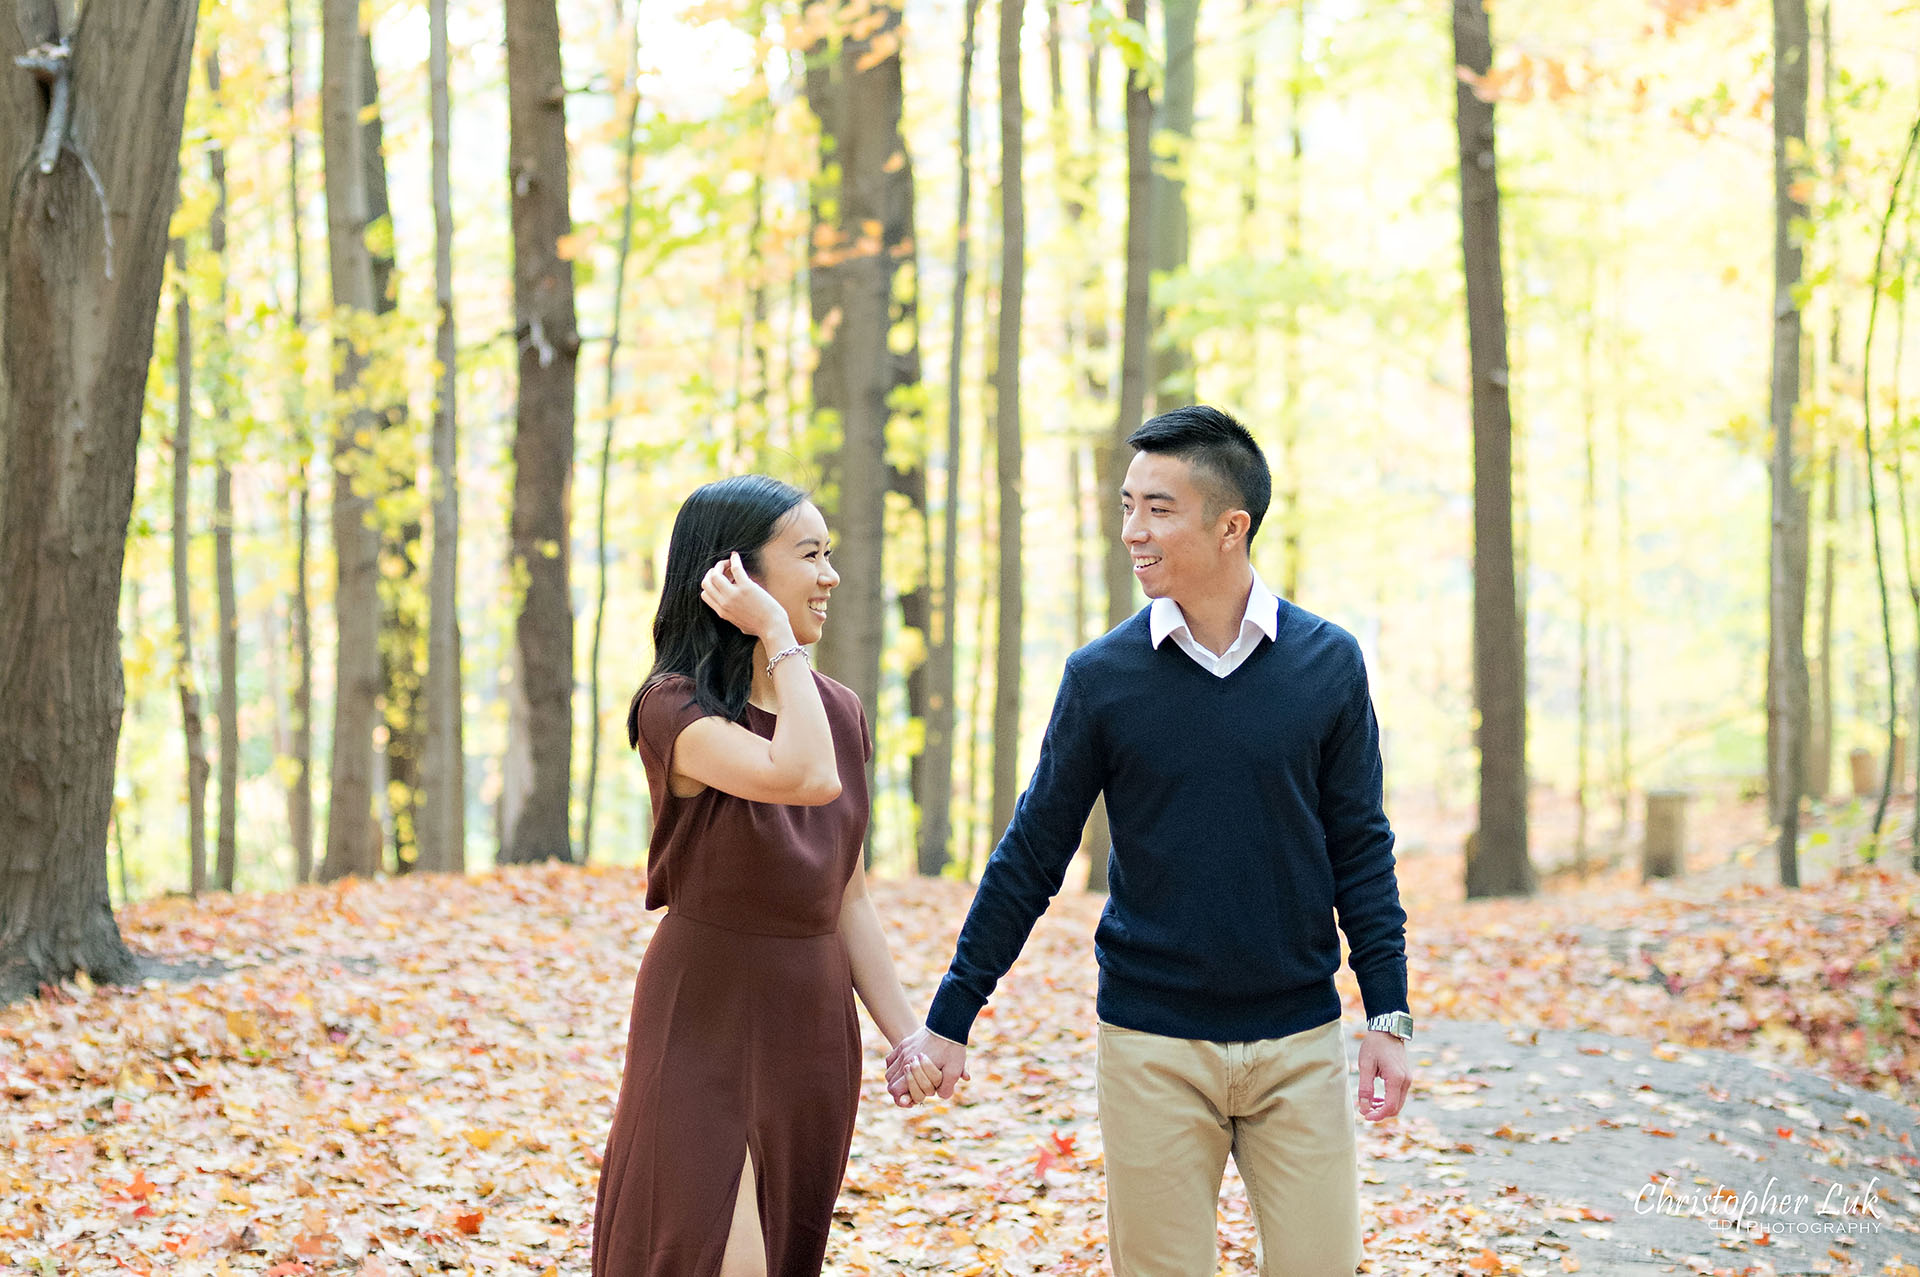 Christopher Luk Toronto Wedding Engagement Session Photographer Autumn Fall Leaves Natural Candid Photojournalistic Bride Groom Hiking Trail Trees Smiling Each Other Happy Walking Holding Hands Together Landscape Small